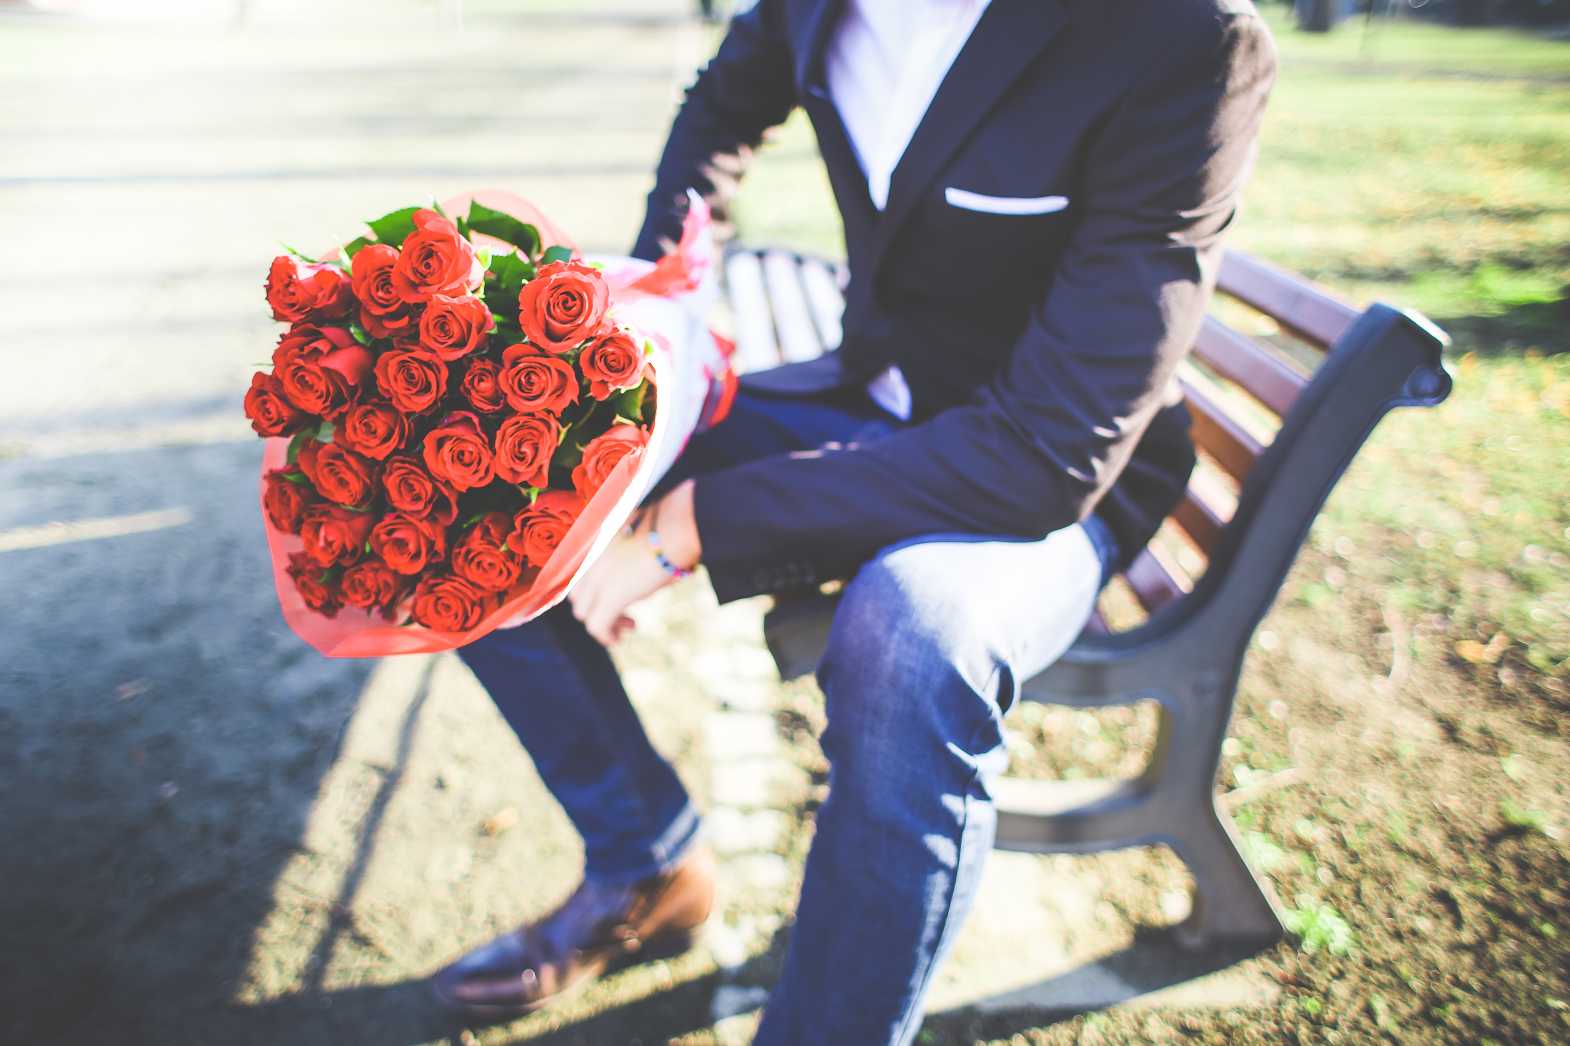 Free stock photo of Man with a Bouquet of Roses from picjumbo.com